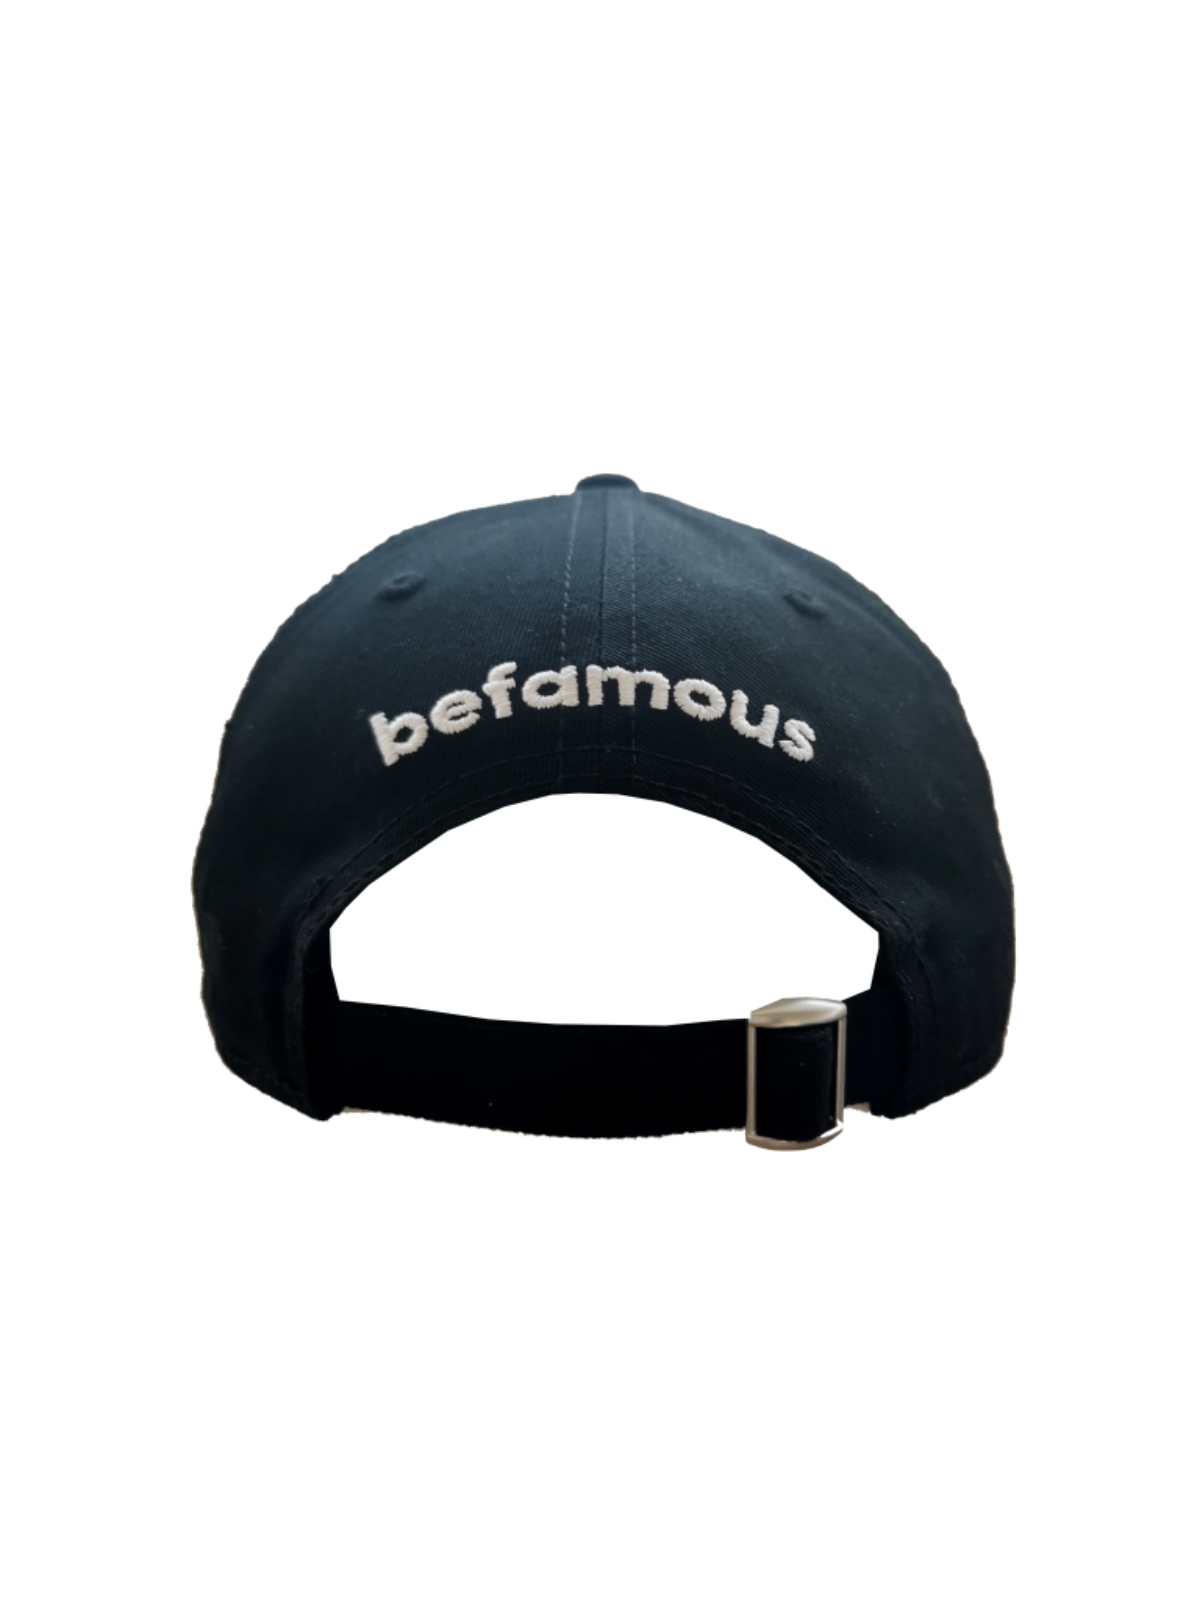 Be Famous CAP, ITWASA